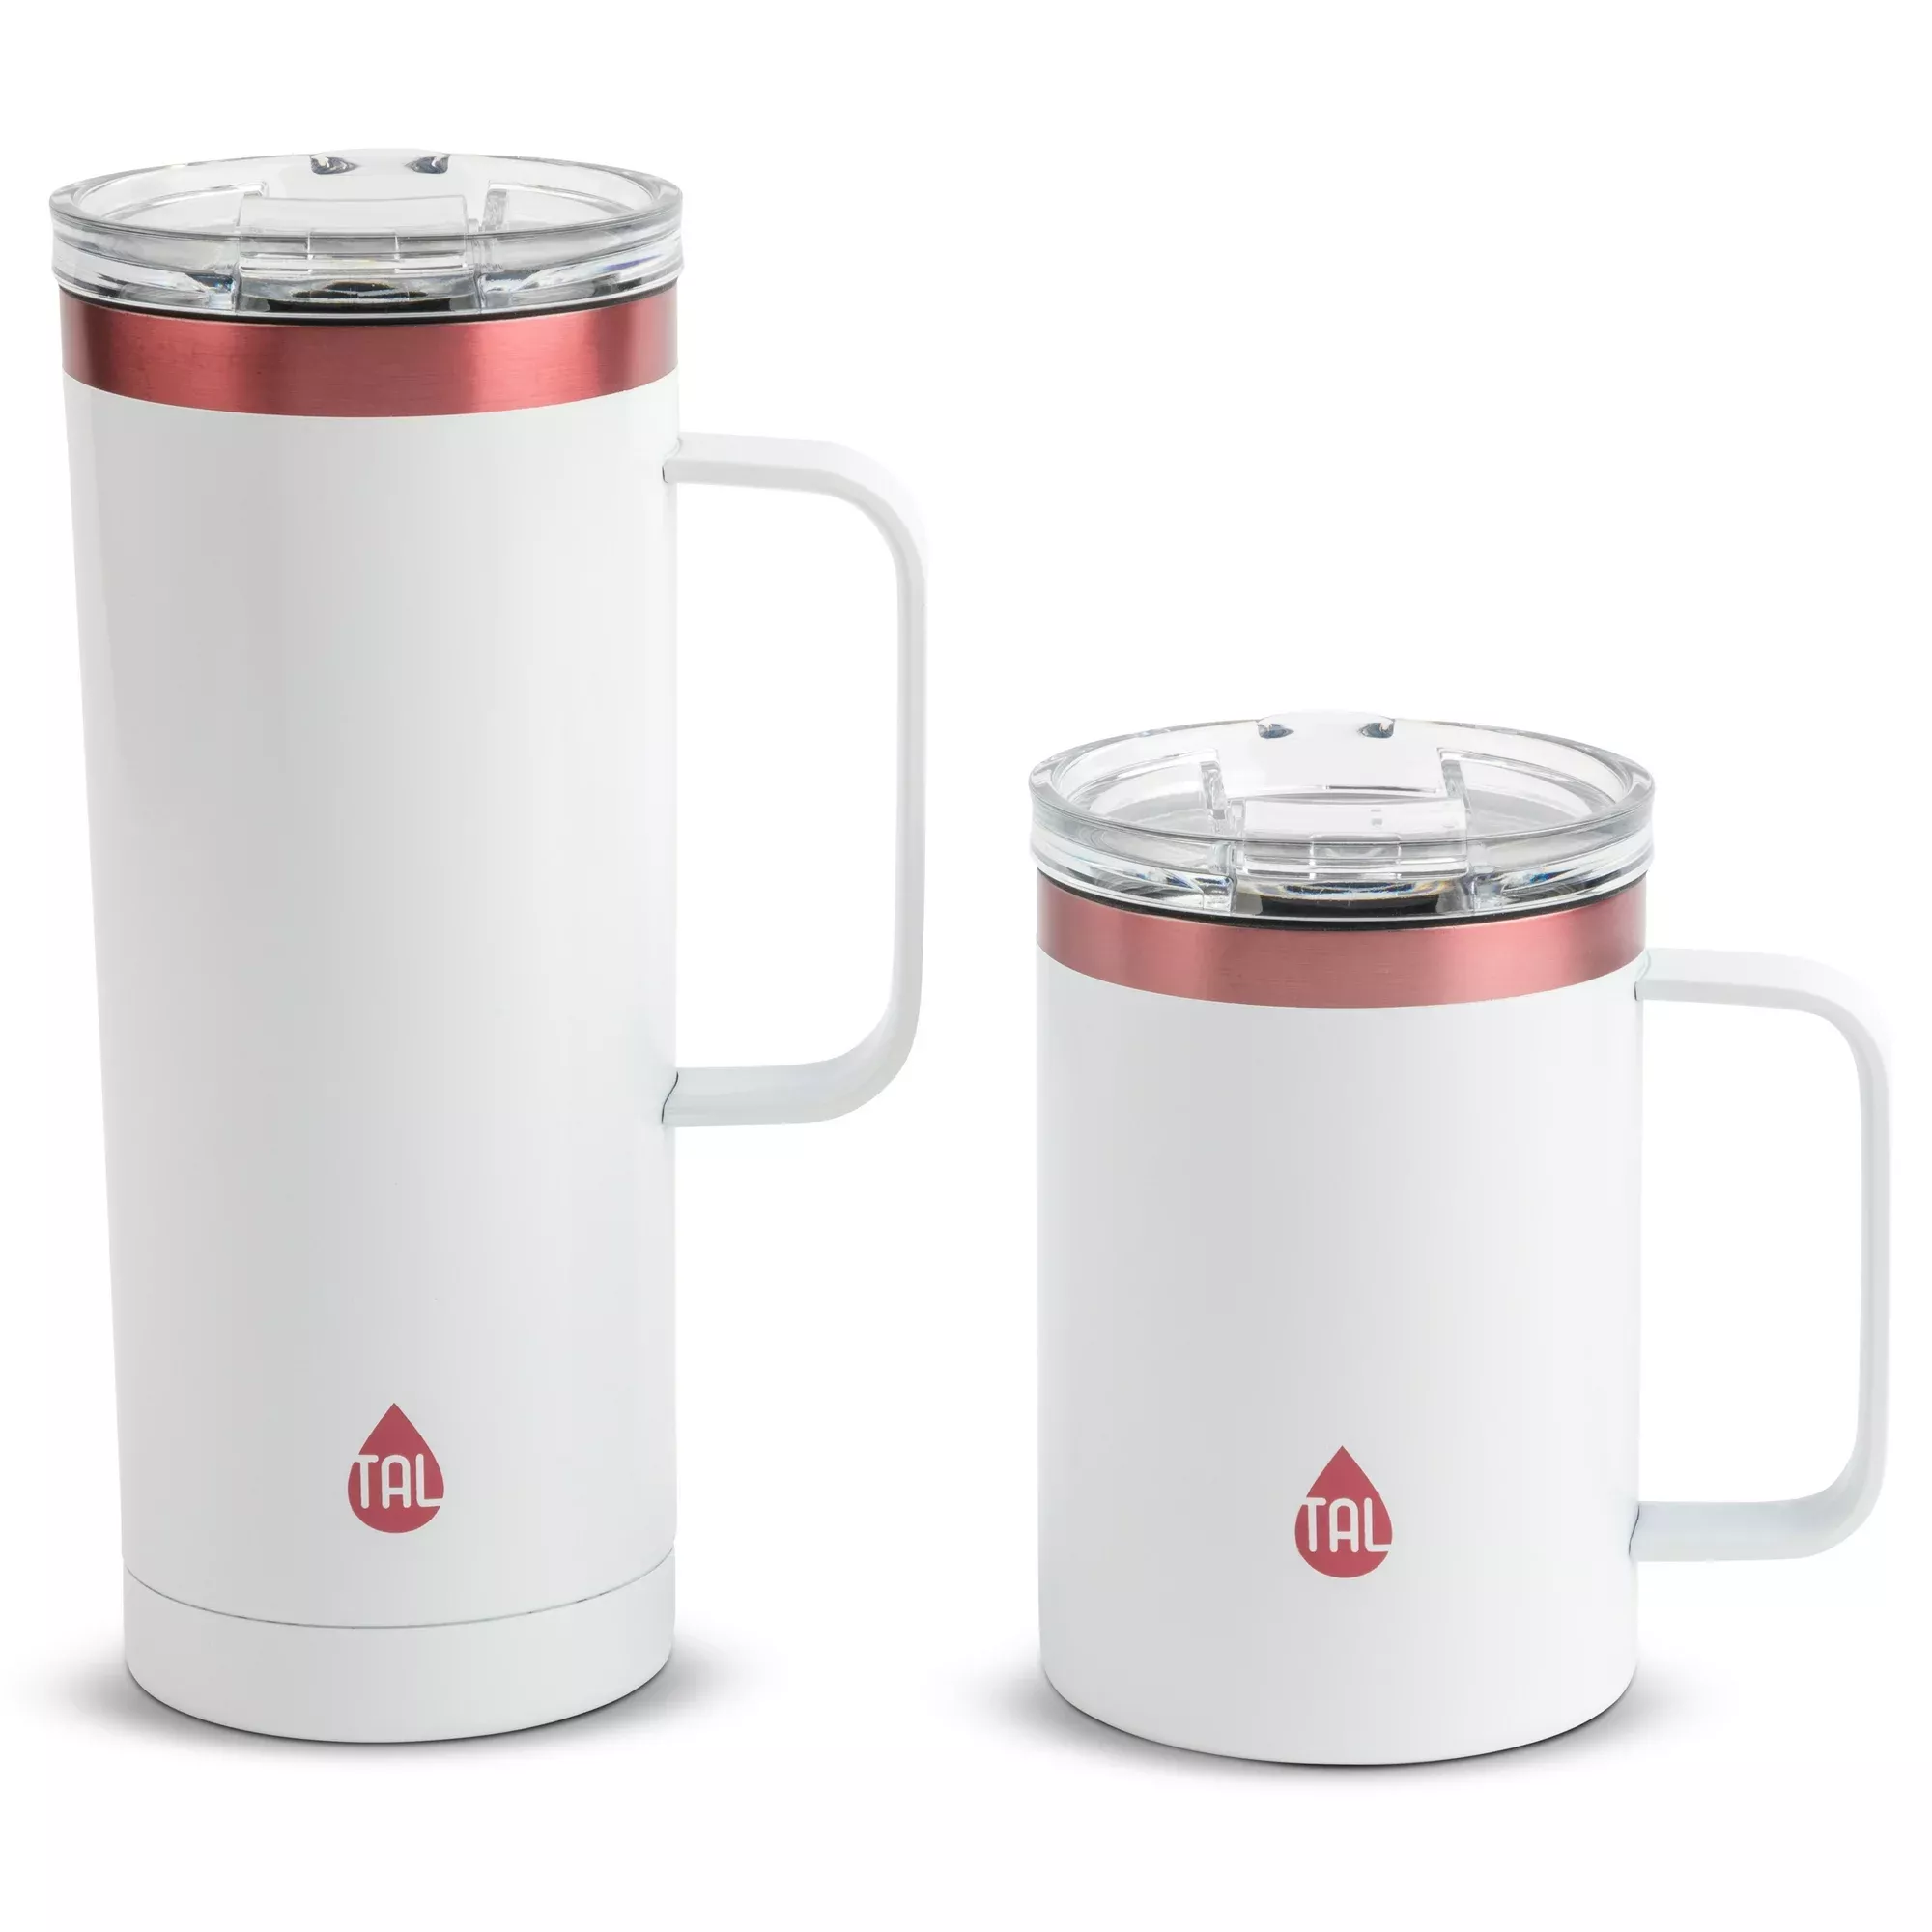 Tal Stainless Steel Mountaineer Coffee Mug 2 Pack, 20 fl oz and 12 fl oz, Black and Gold